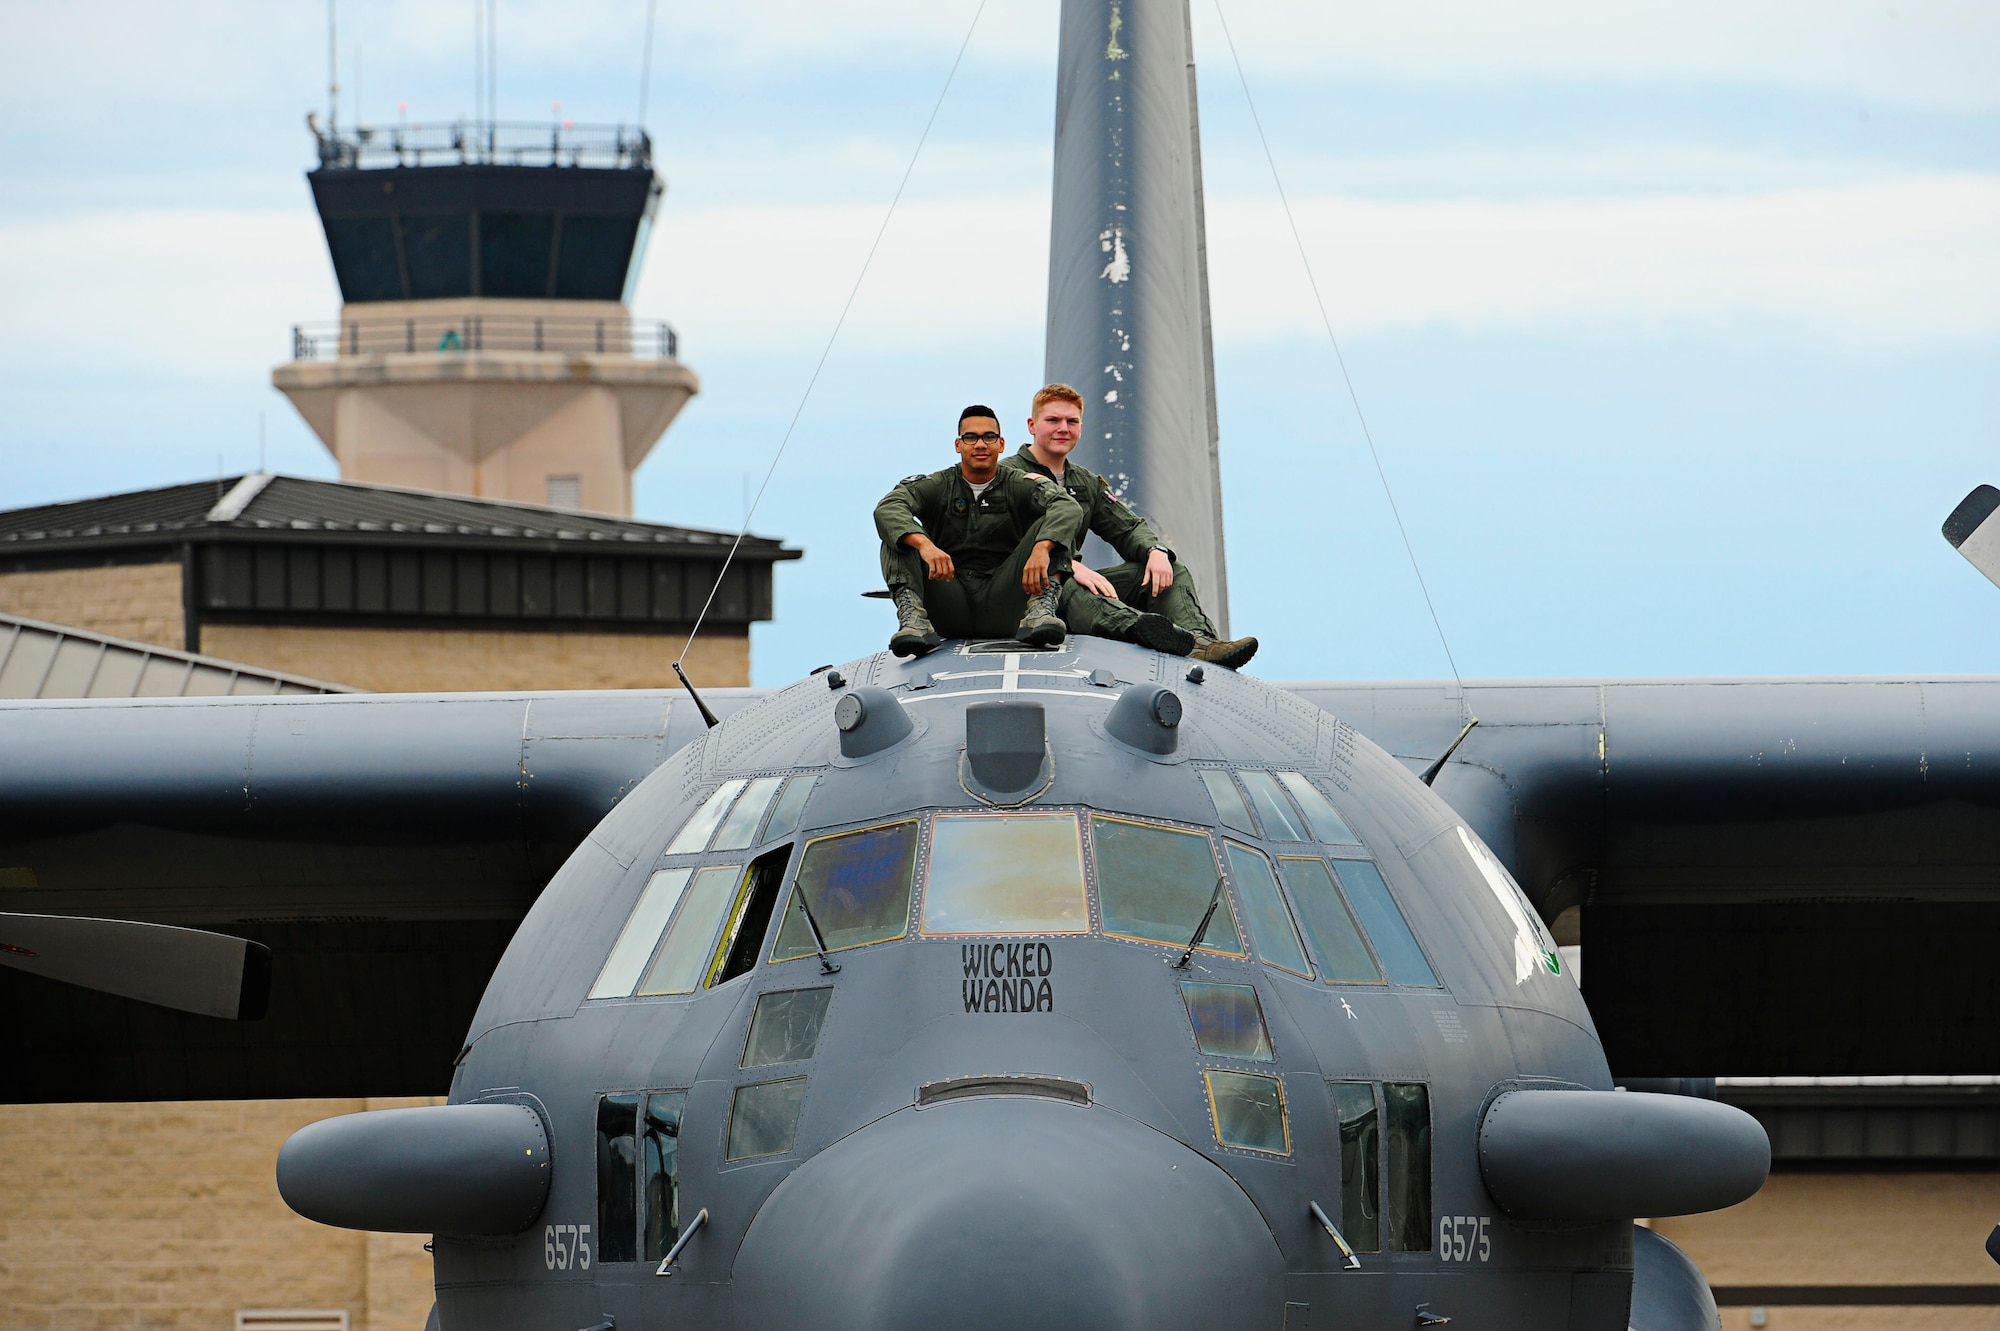 Airman 1st Class Taylor Williams and Ian Robinson, 4th Special Operations Squadron special missions aviators, pose with “Wicked Wanda”, an AC-130H Spectre gunship, on Hurlburt Field, Fla., Dec. 19, 2014. ” Wicked Wanda” was flown during the Iran Hostage Crisis. (U.S. Air Force photo/Senior Airman Desiree W. Moye)